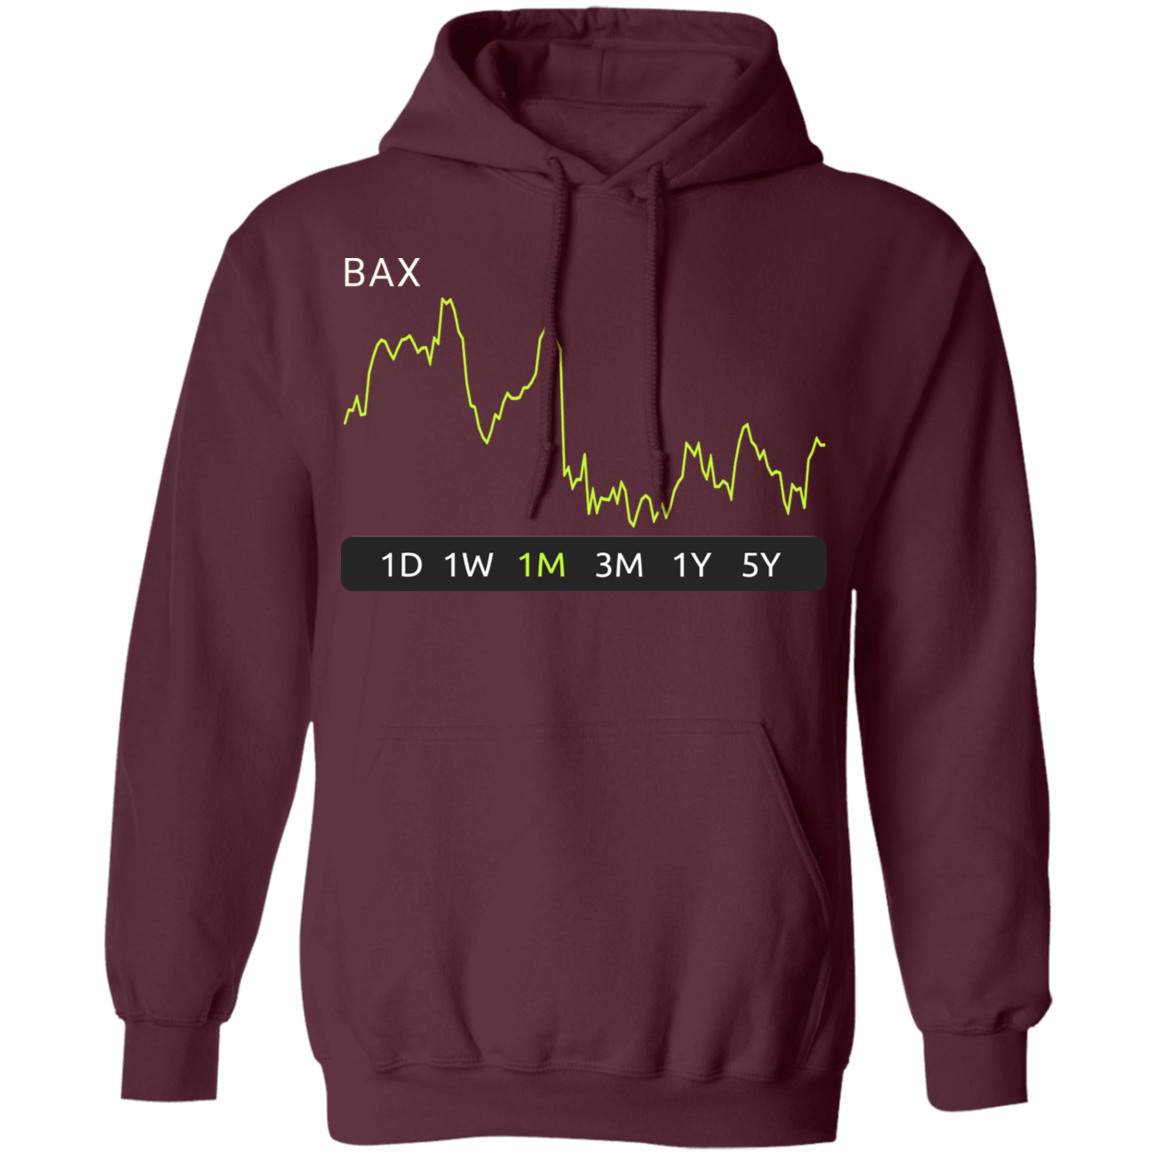 BAX Stock 1m Pullover Hoodie